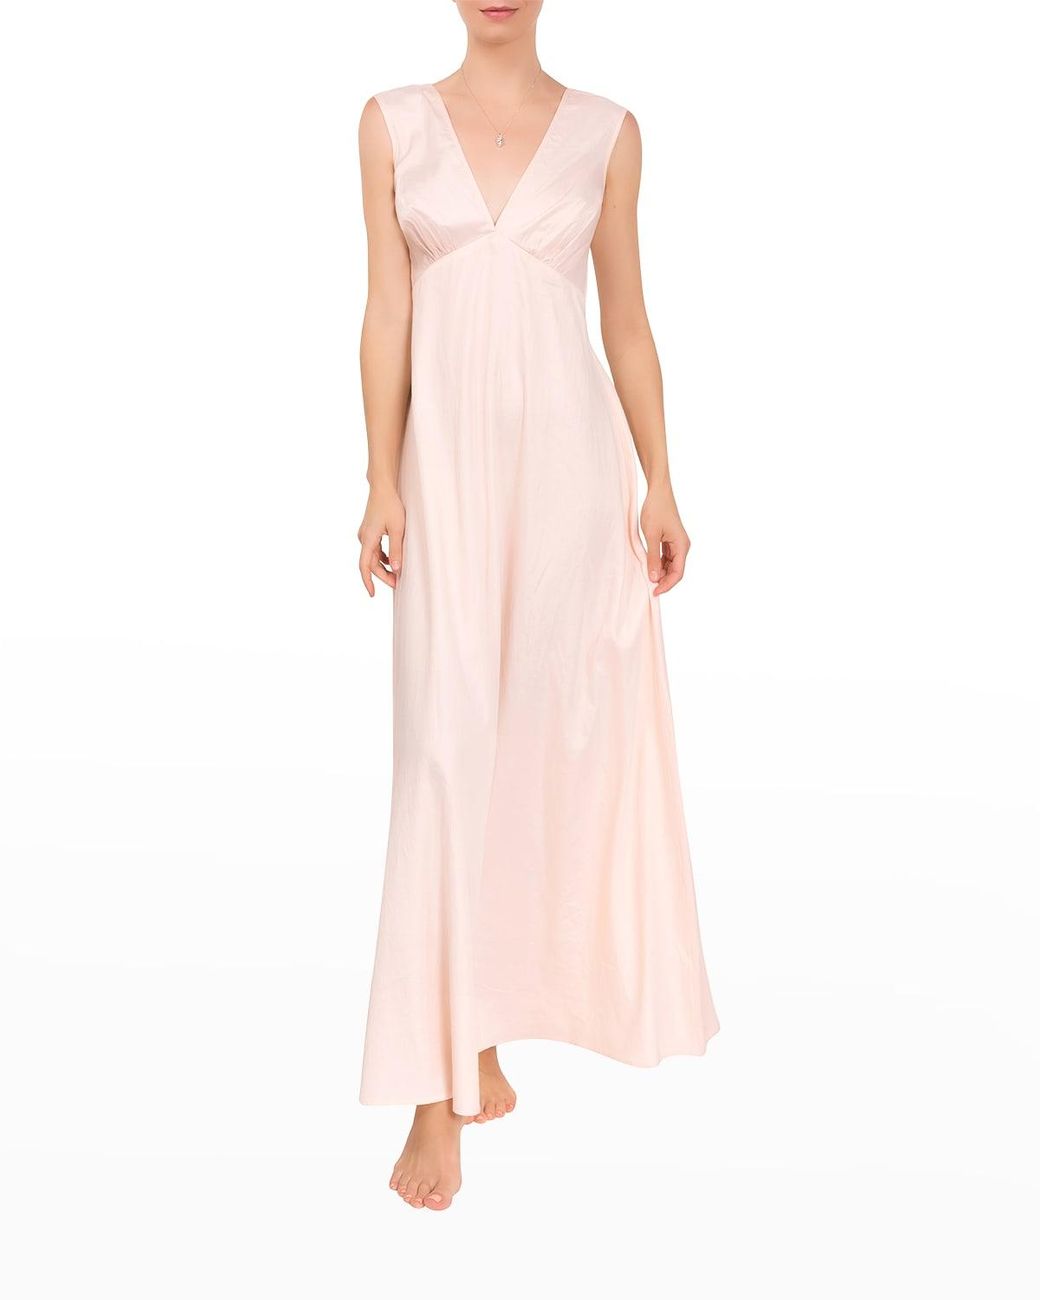 EVERYDAY RITUAL Amelia Empire-waist Nightgown in Pink | Lyst